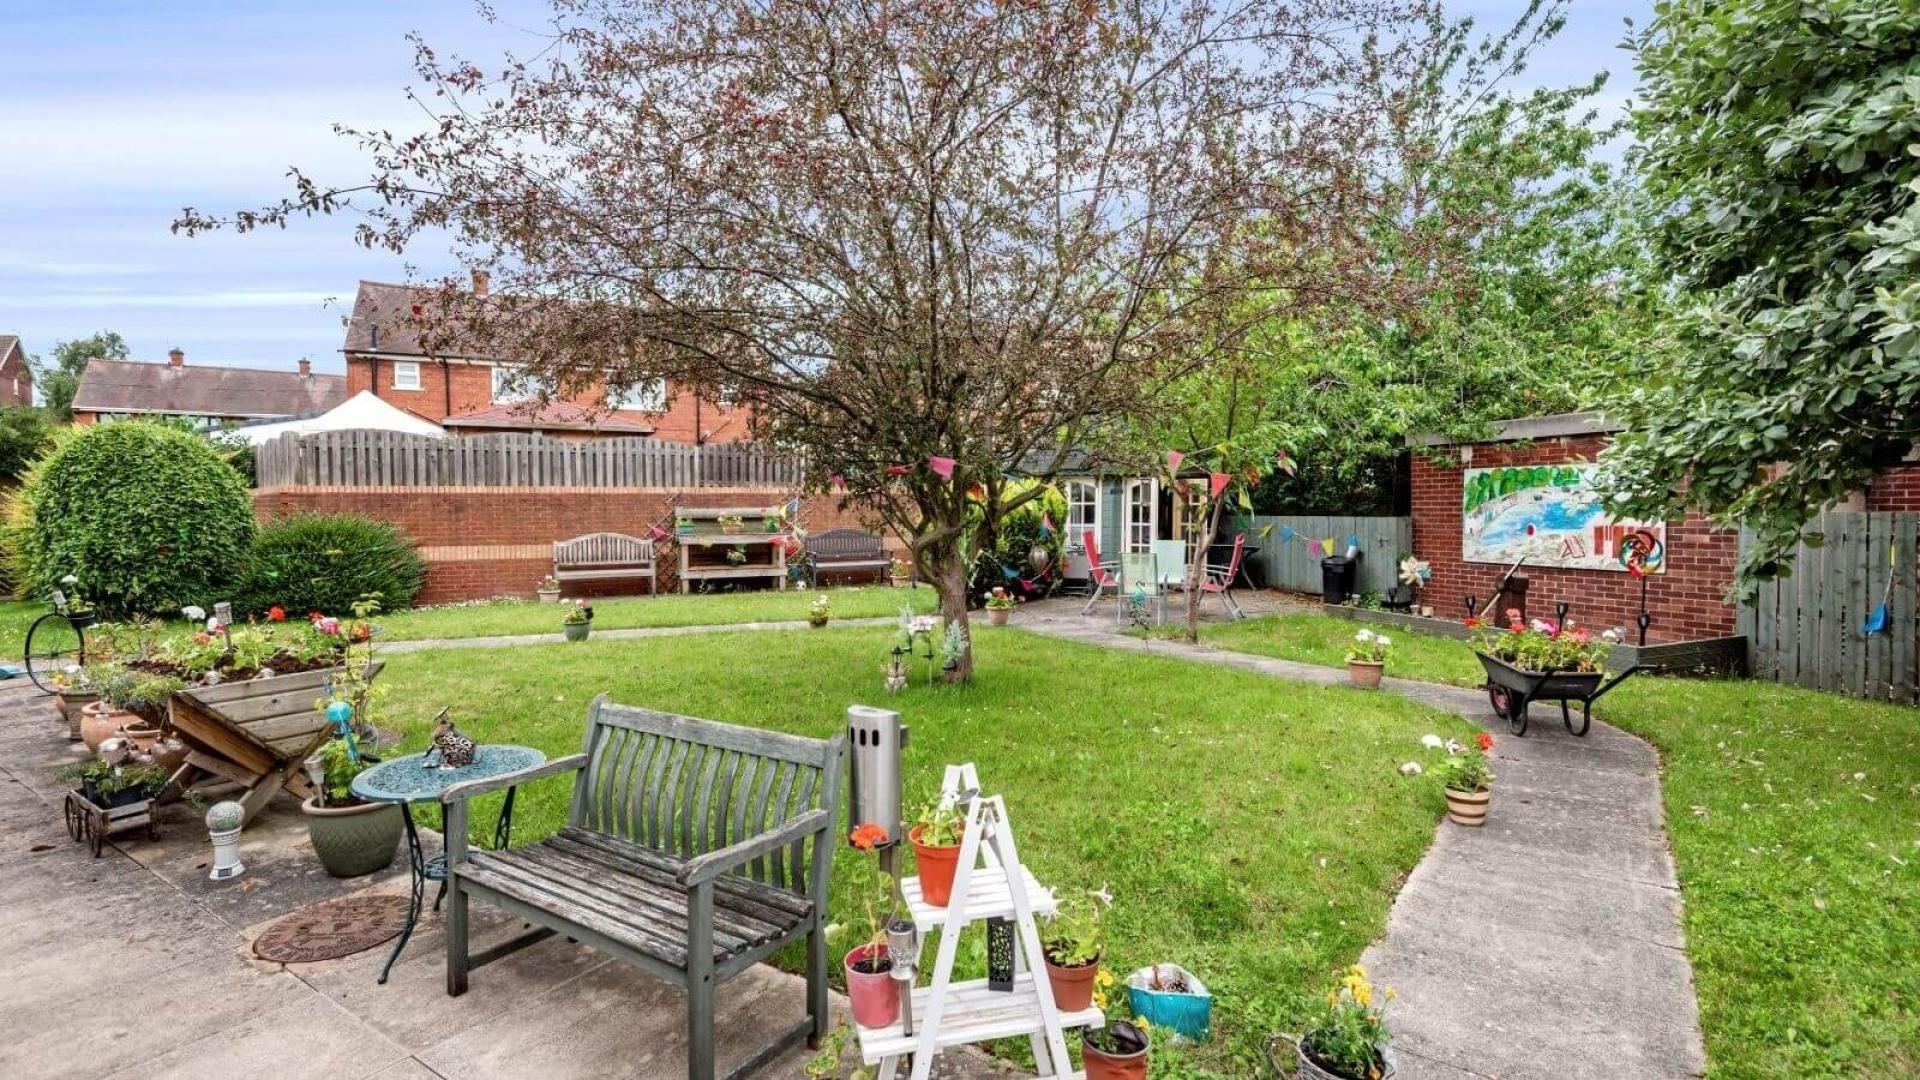 Outdoor garden area at Cherry Trees Care Home in Rotherham 